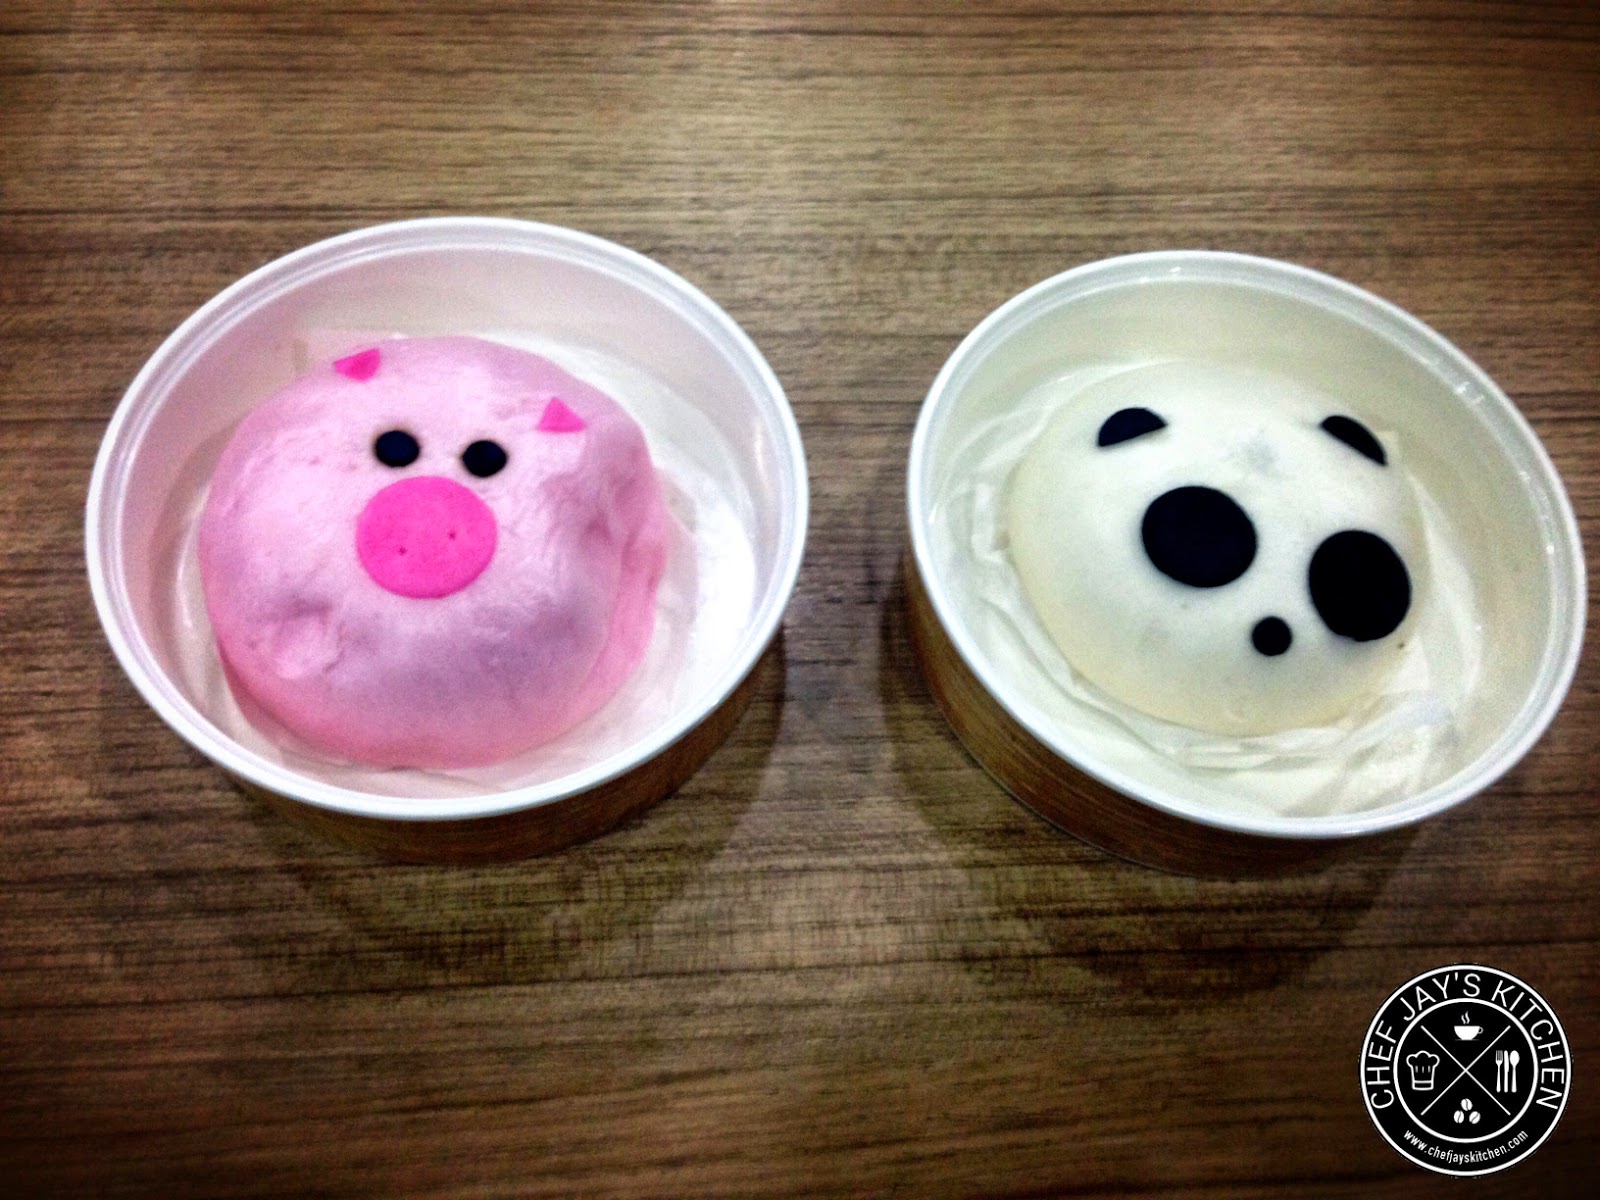 Chowking's Happy Pao: Piggy and Panda Pao Containers